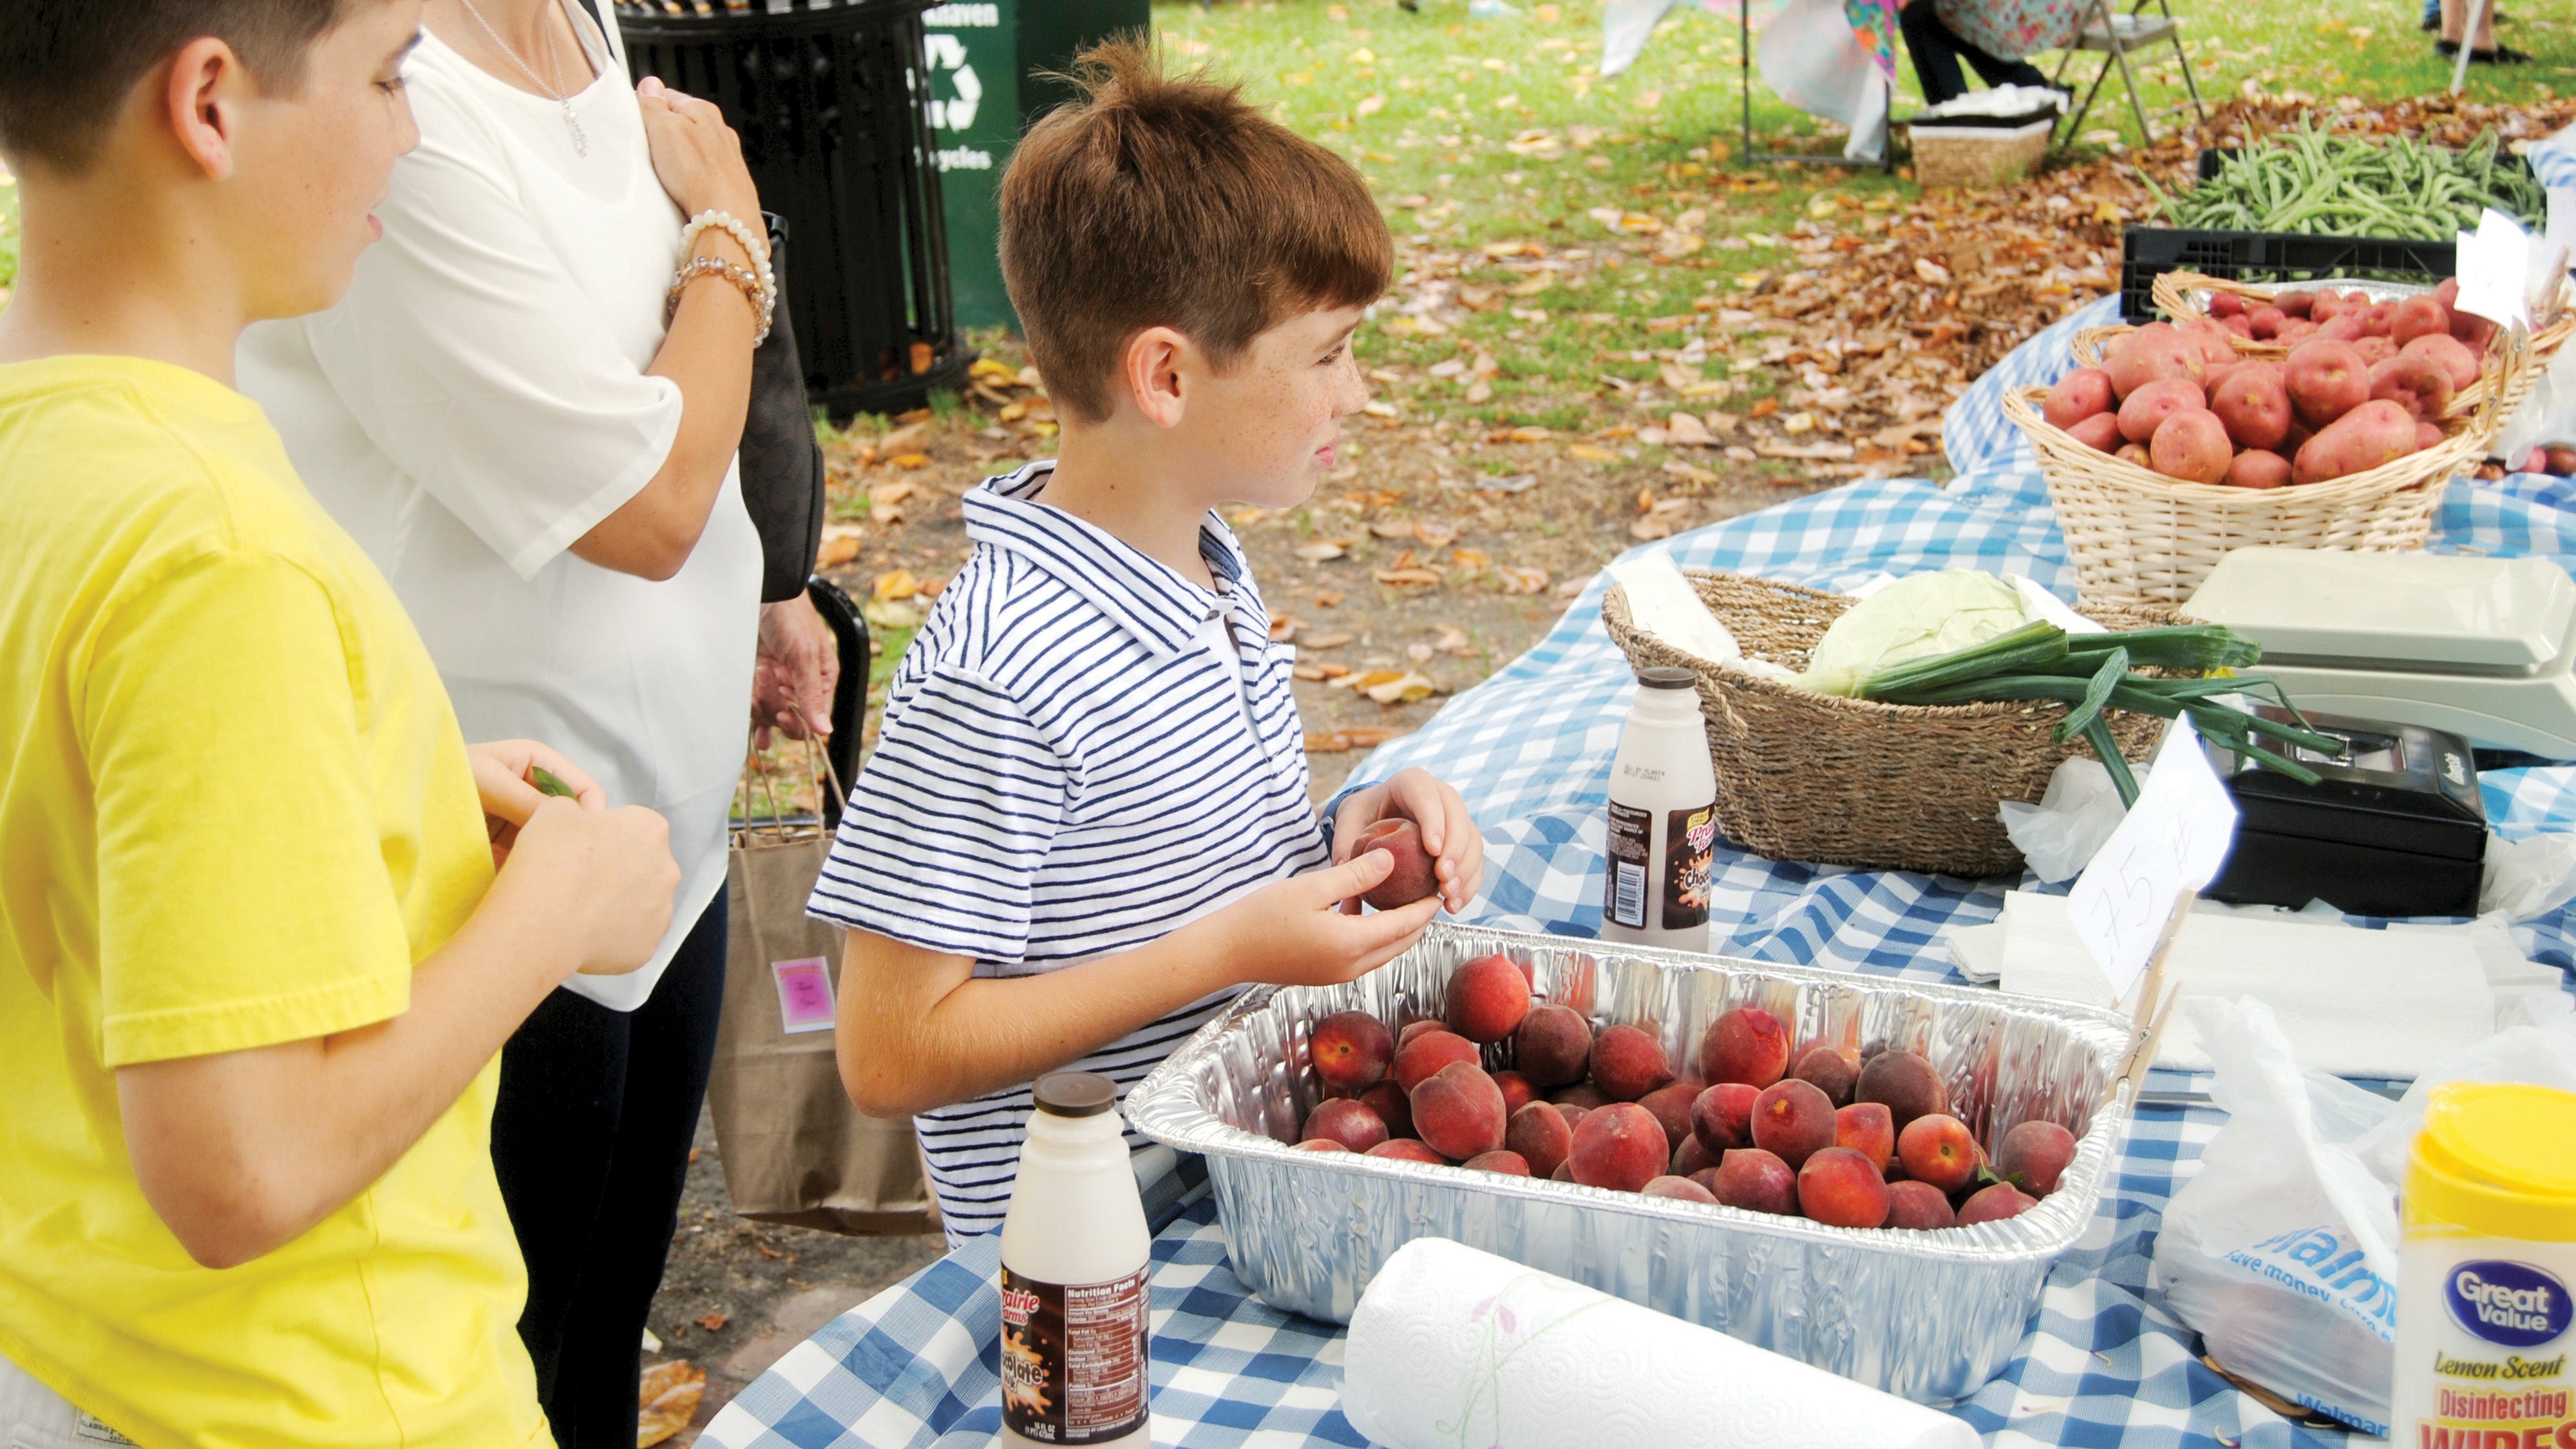 It's farm to table at Brookhaven Farmers Market — Season opens Friday